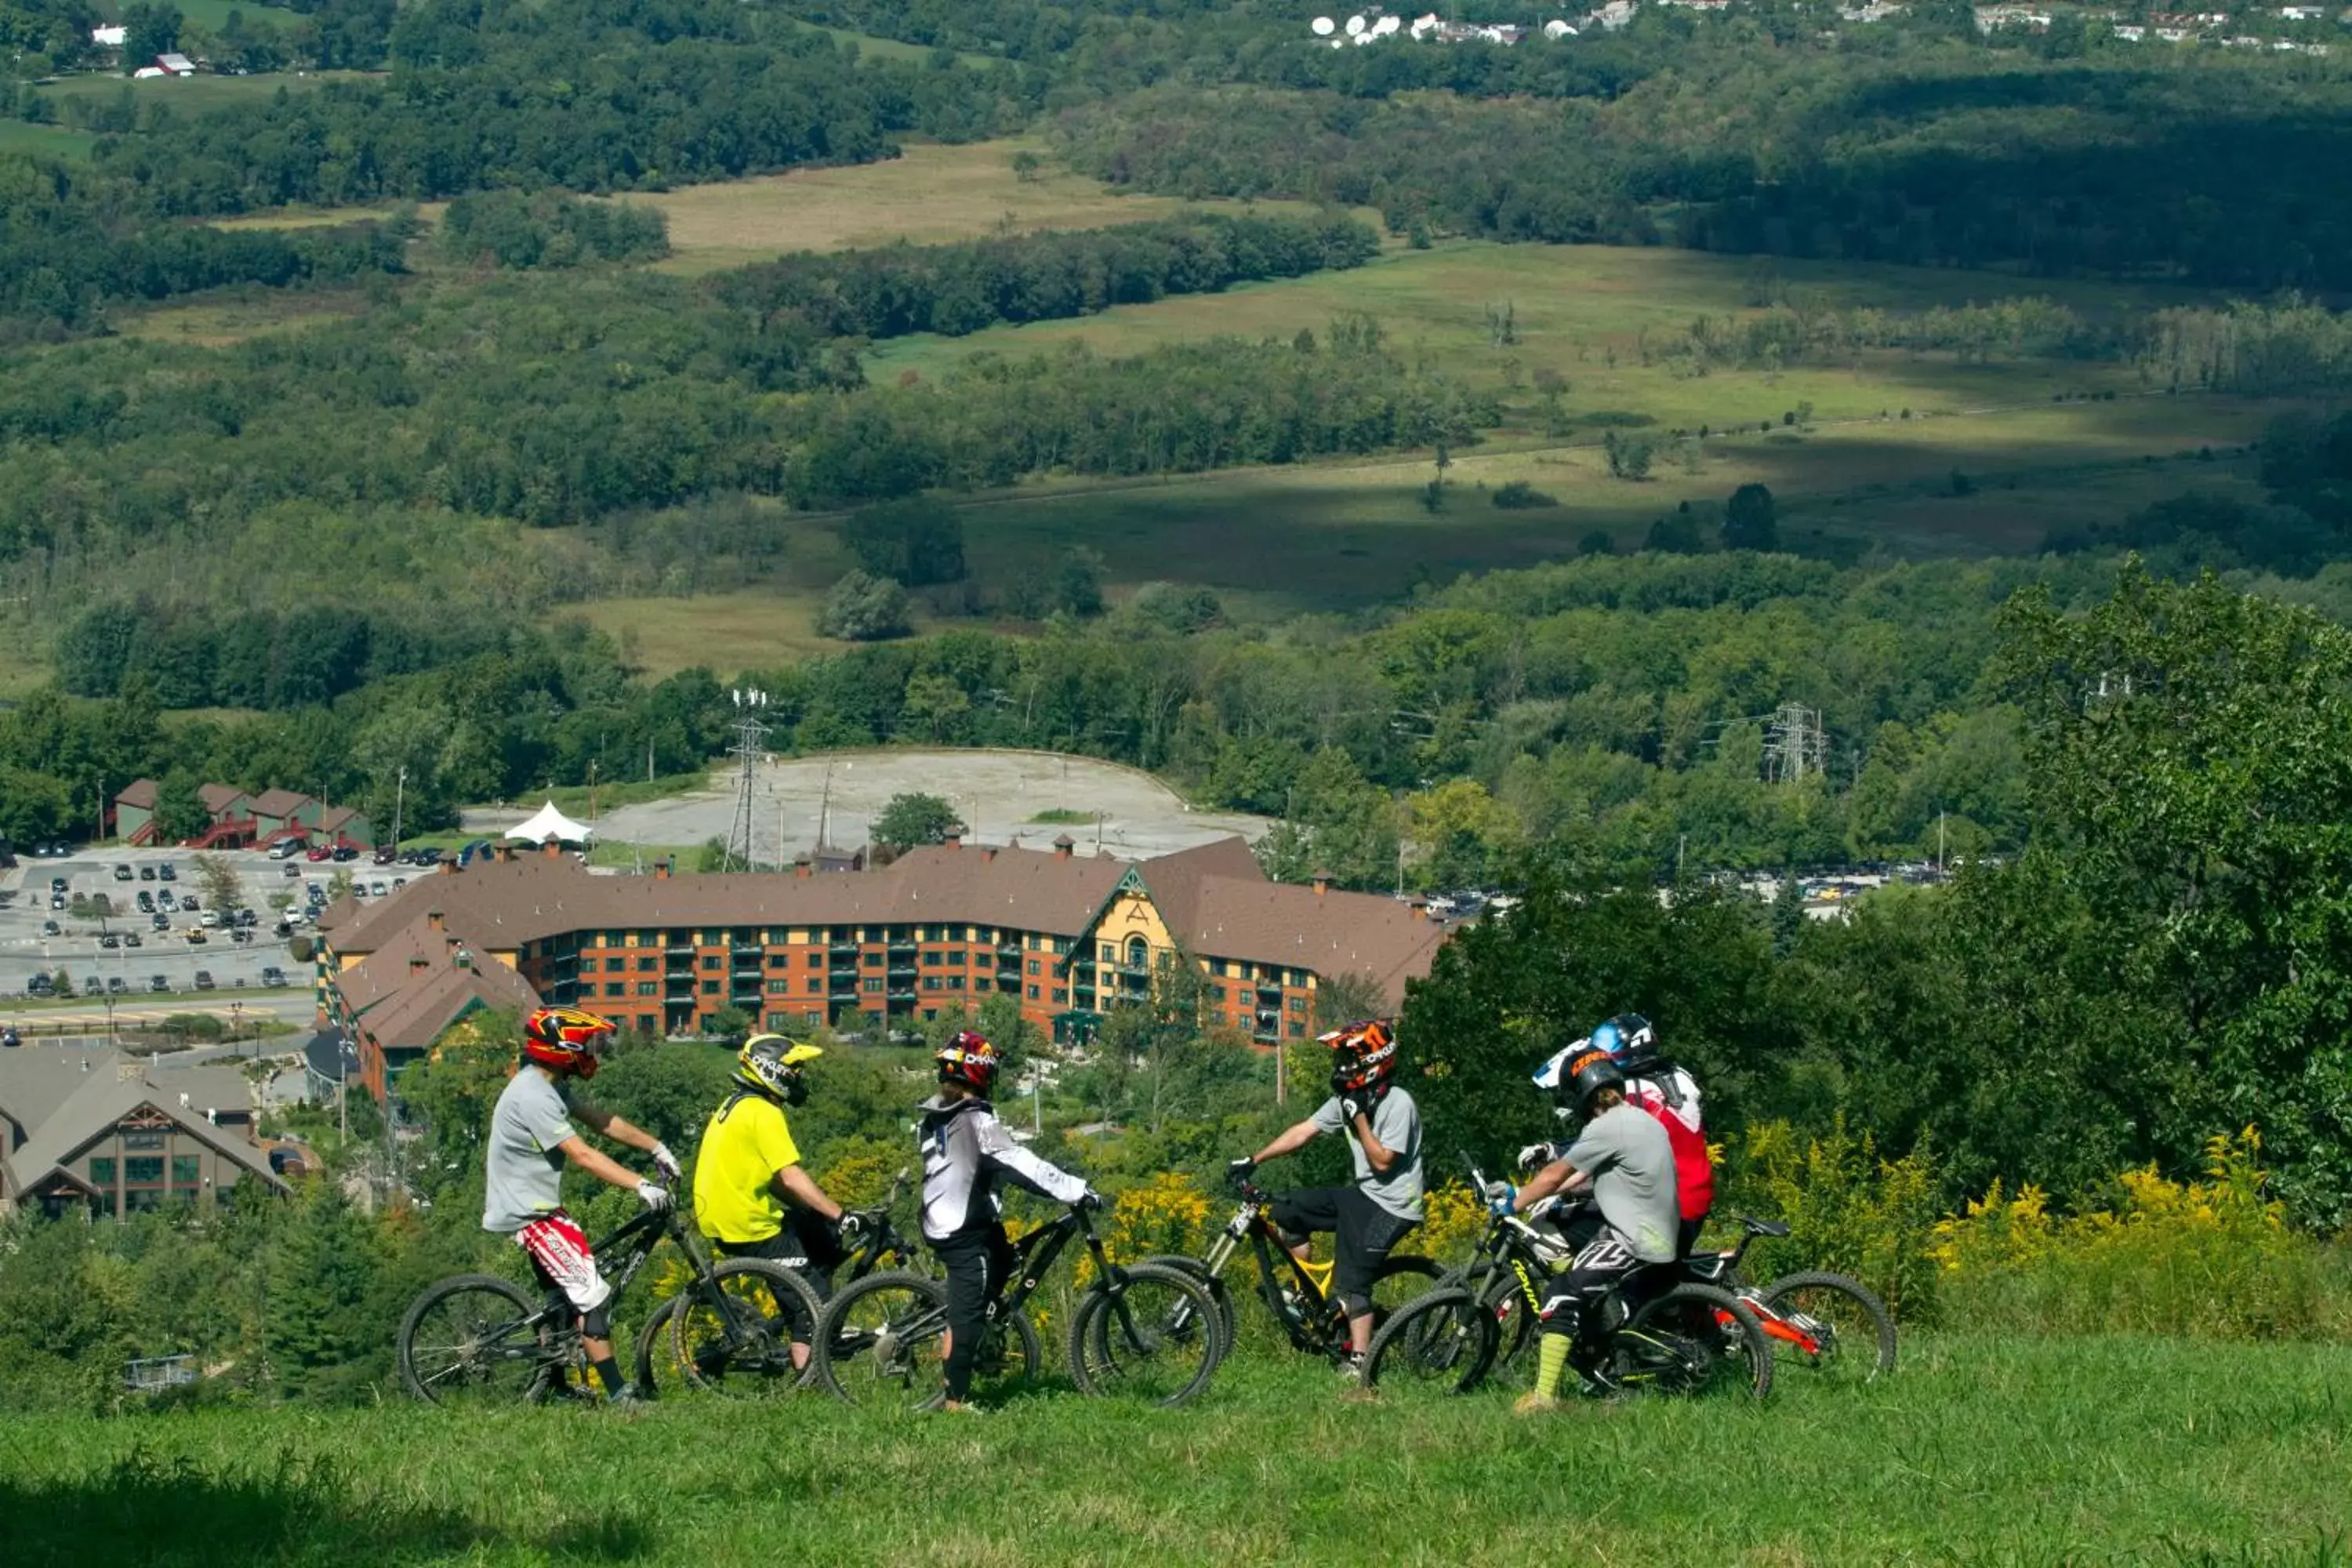 Activities in The Appalachian at Mountain Creek